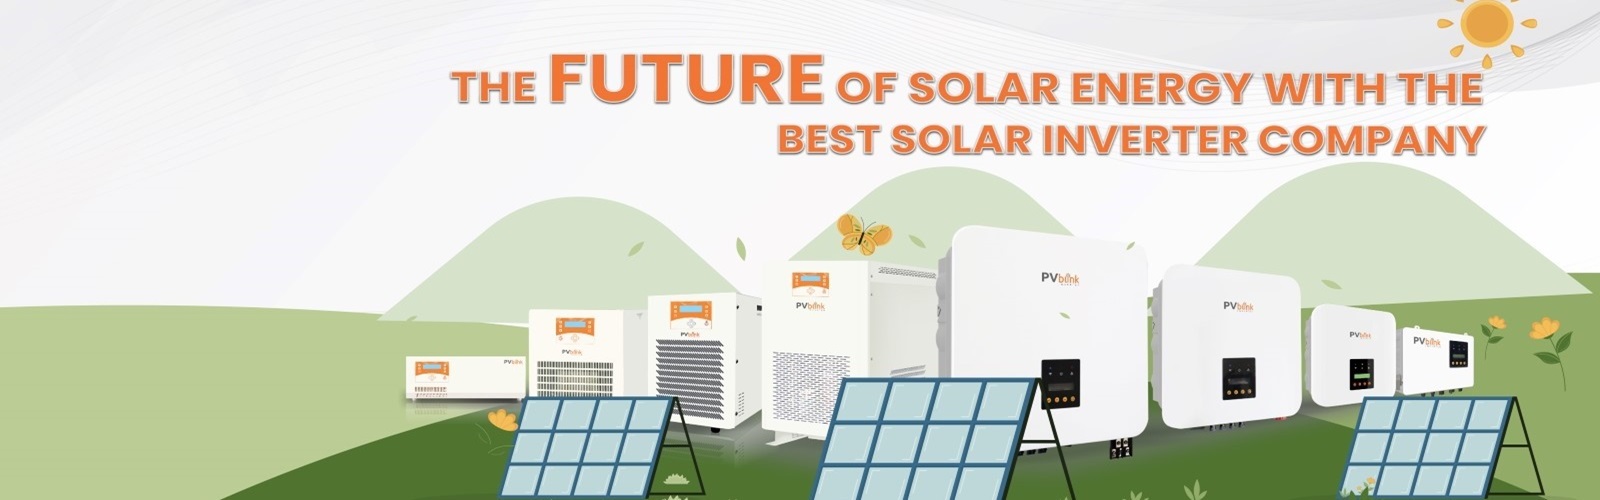 The Future of Solar Energy with the Best Solar Inverter Company